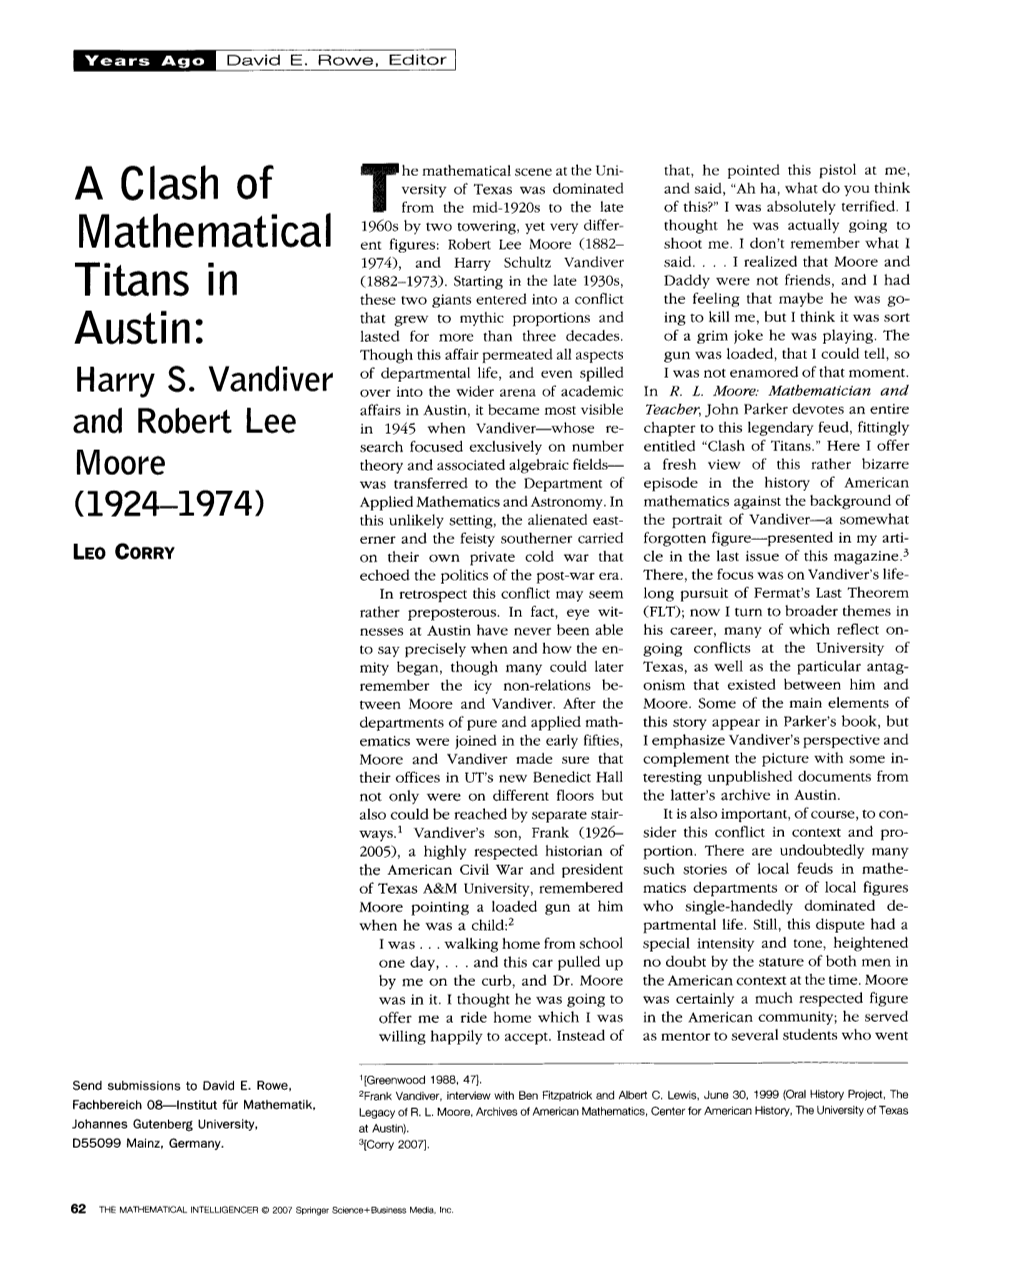 A Clash of Mathematical Titans in Austin: Harry S. Vandiver and Robert Lee Moore (1924-1974)